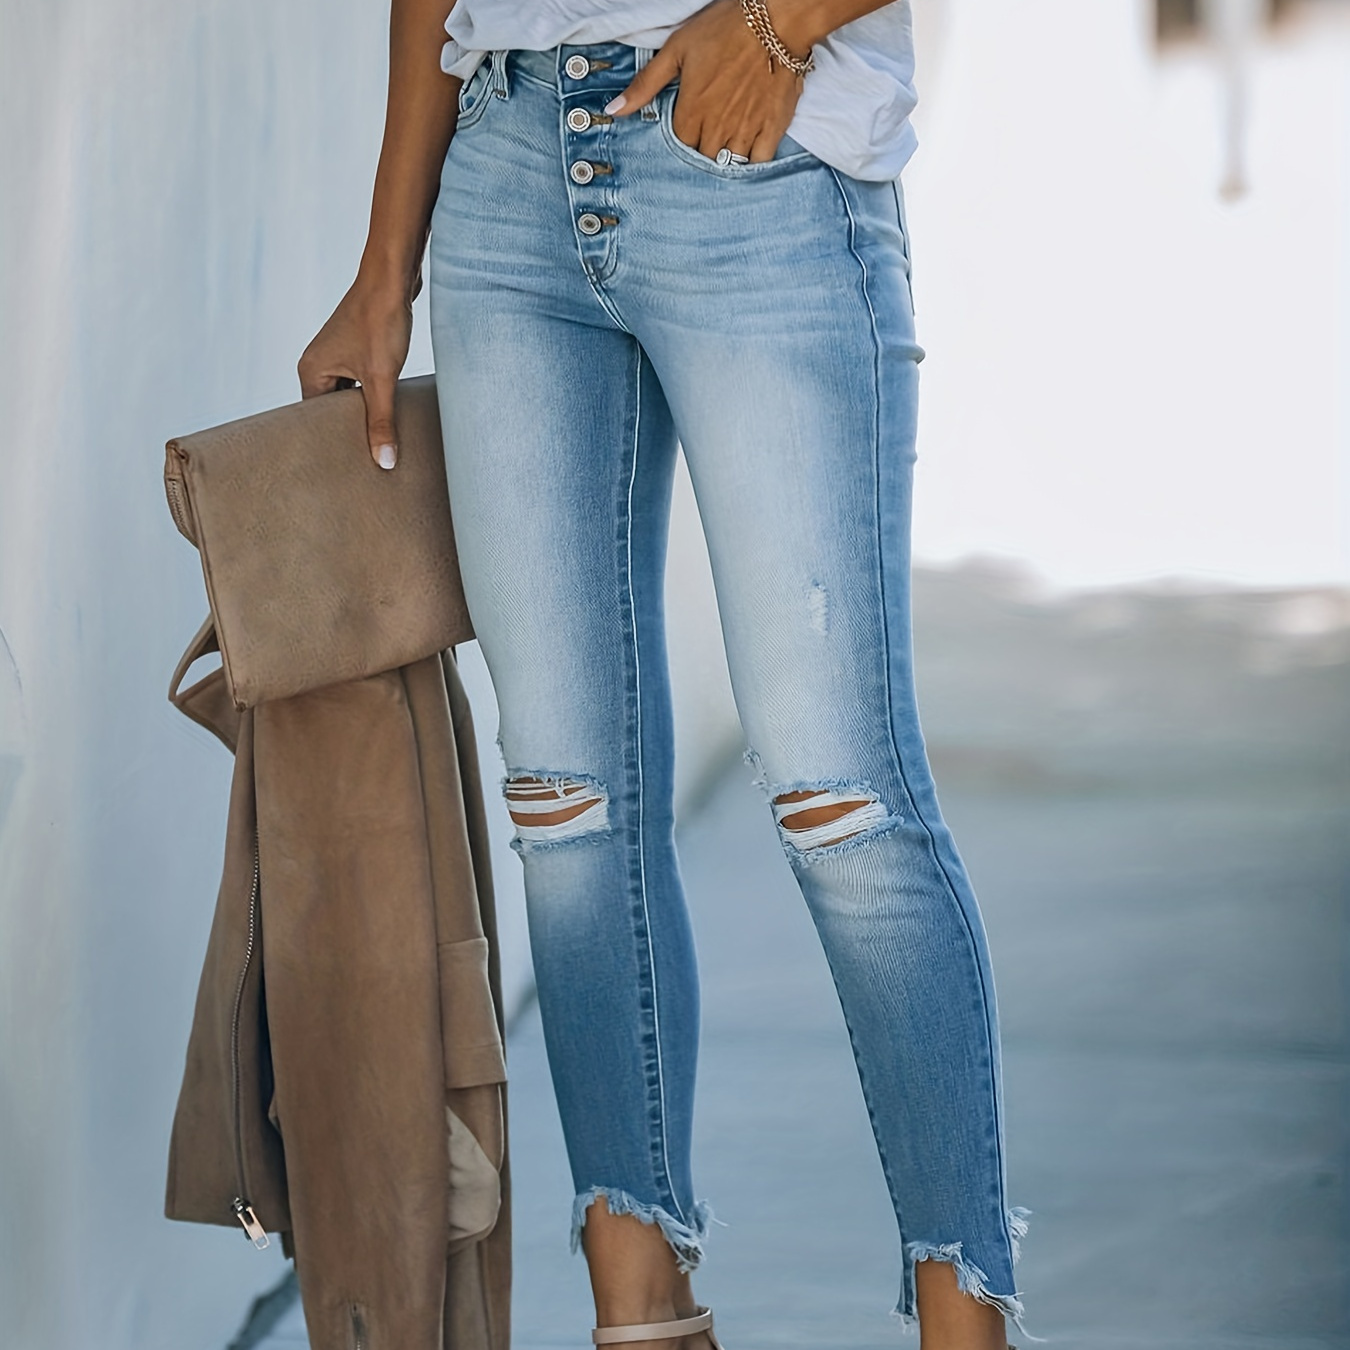 

Ripped Light Wash Jeans, High-rise Cropped & Ripped Hem Skinny Jeans, Casual & Trendy Pants, Women's Clothing & Denim